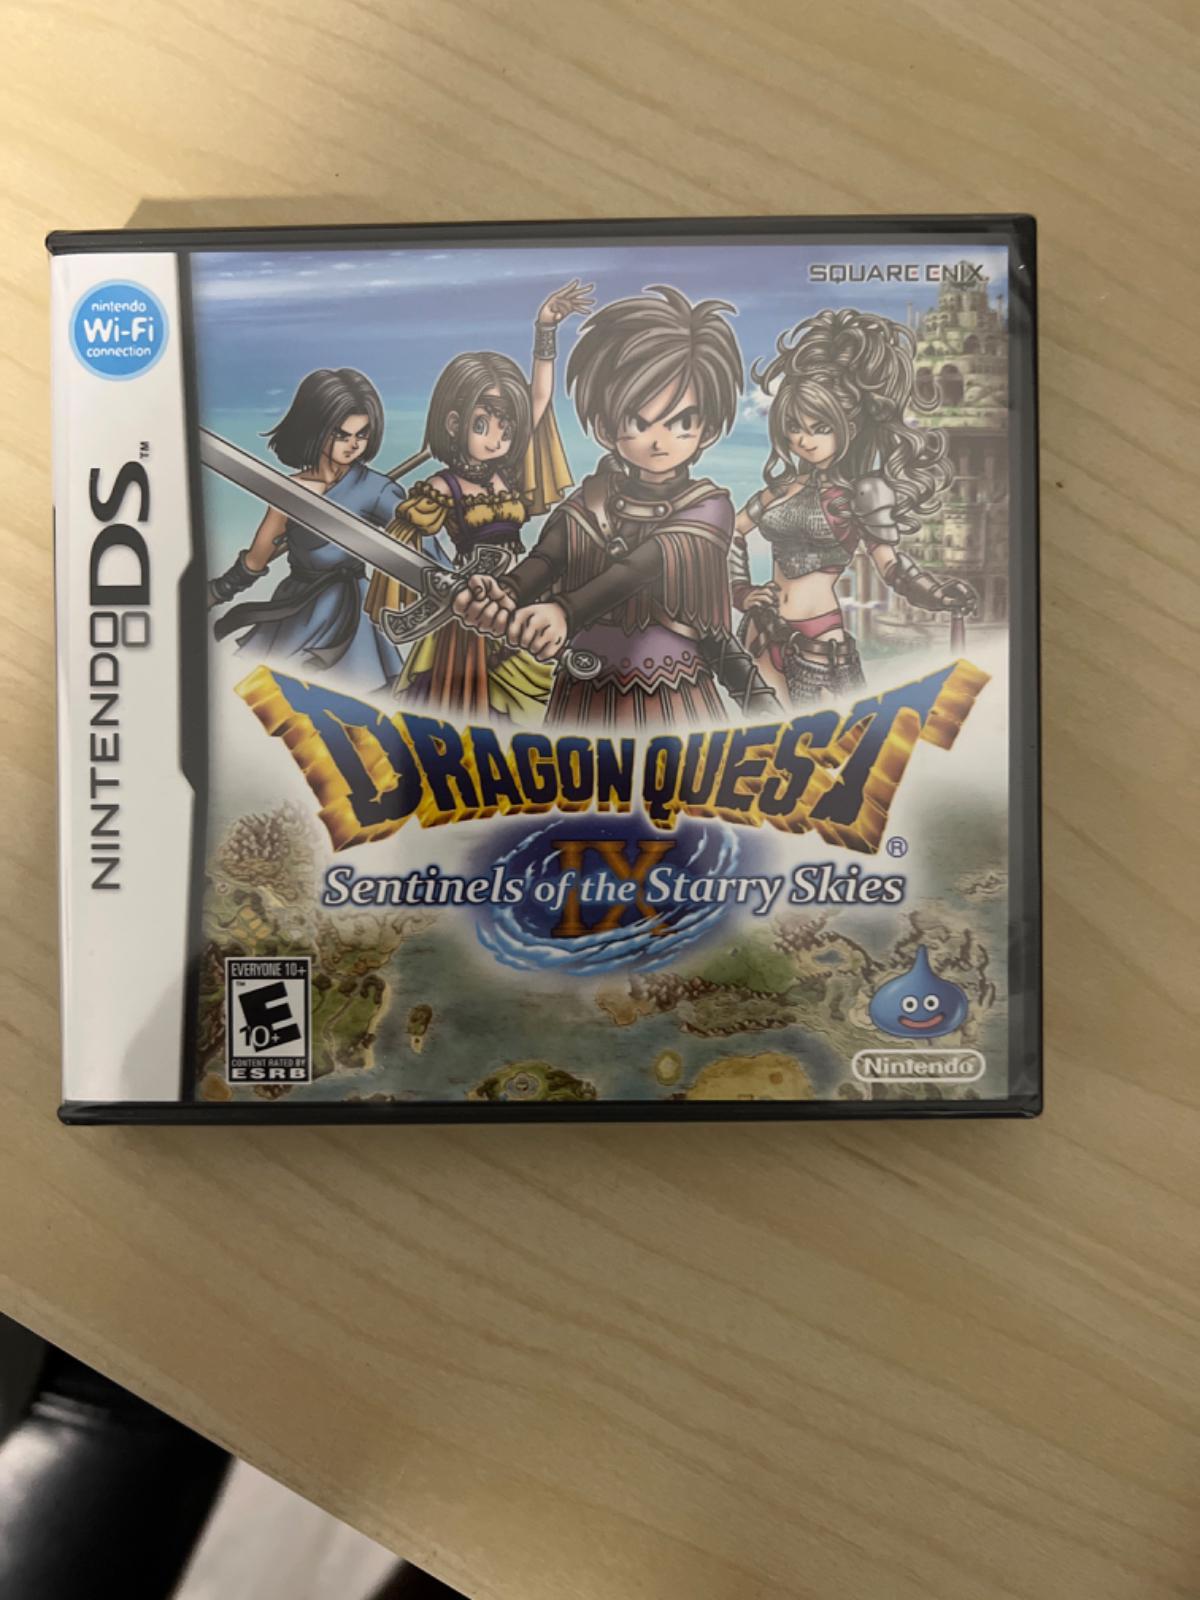 Dragon Quest Ix Sentinels Of The Starry Skies New Item Box And Manual Nintendo Ds